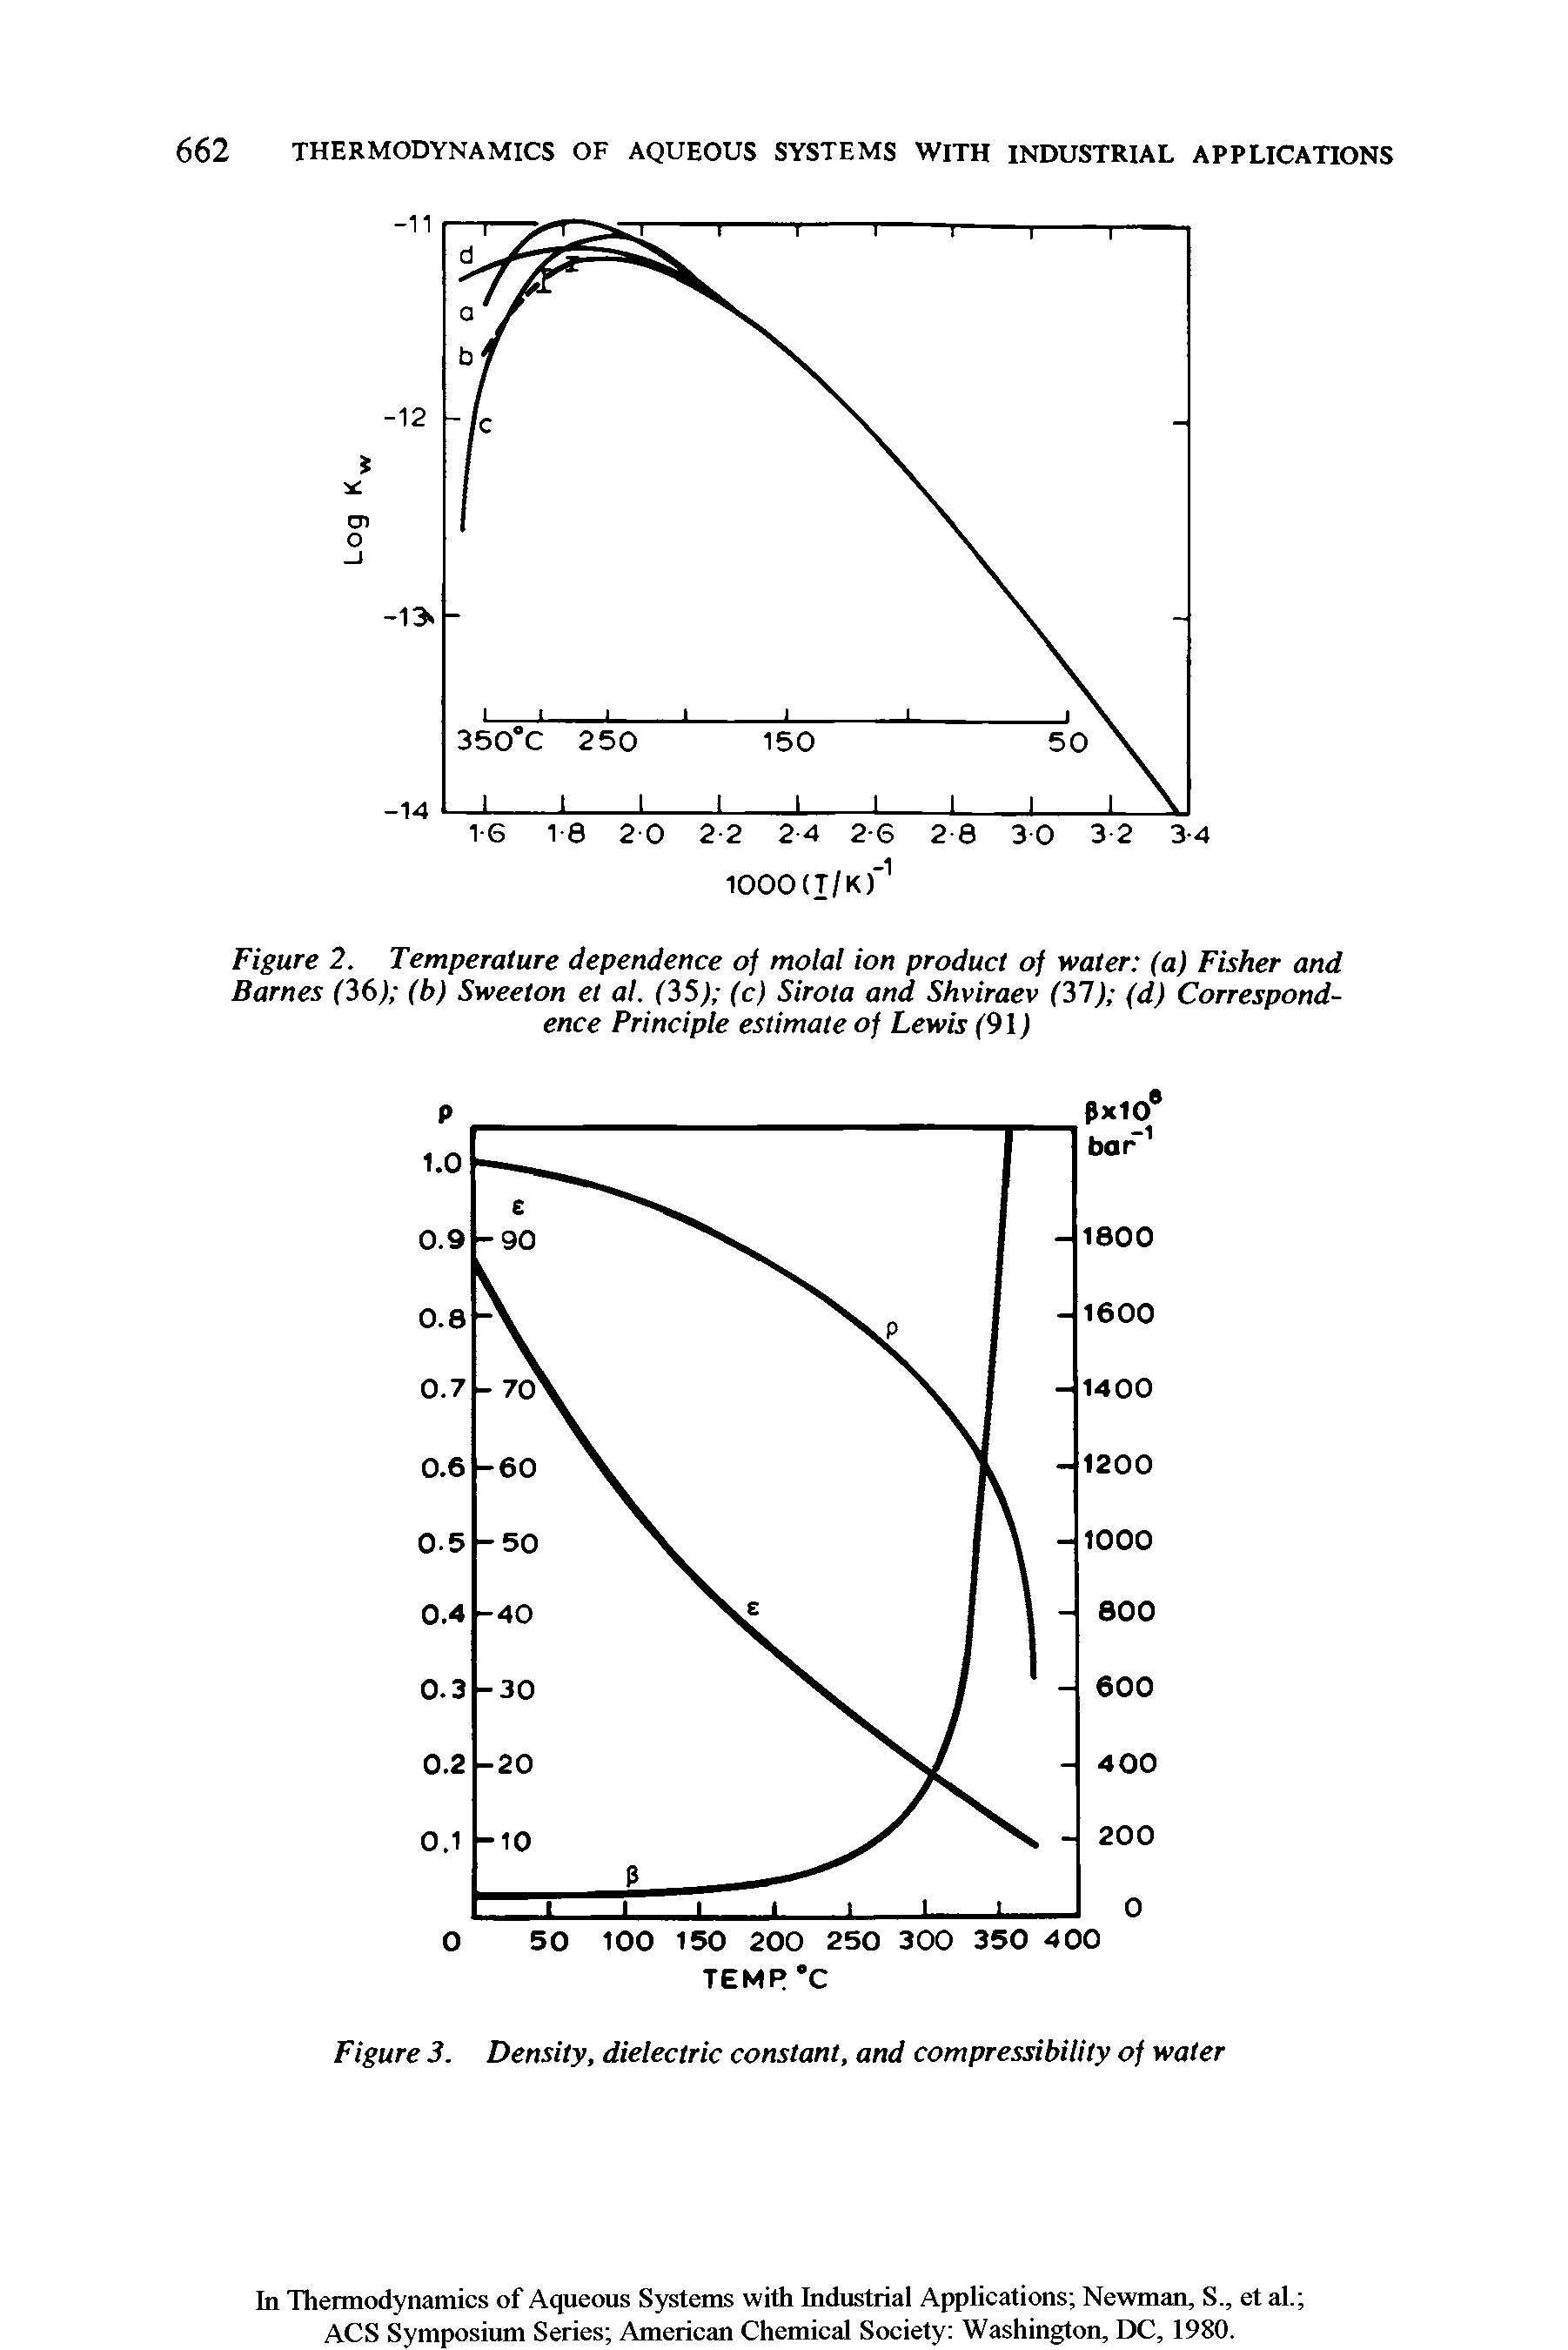 Figure 2. Temperature dependence of molal ion product of water (a) Fisher and Barnes (36) (b) Sweeton et at. (35) (c) Sirota and Shviraev (31) (d) Correspondence Principle estimate of Lewis (91)...